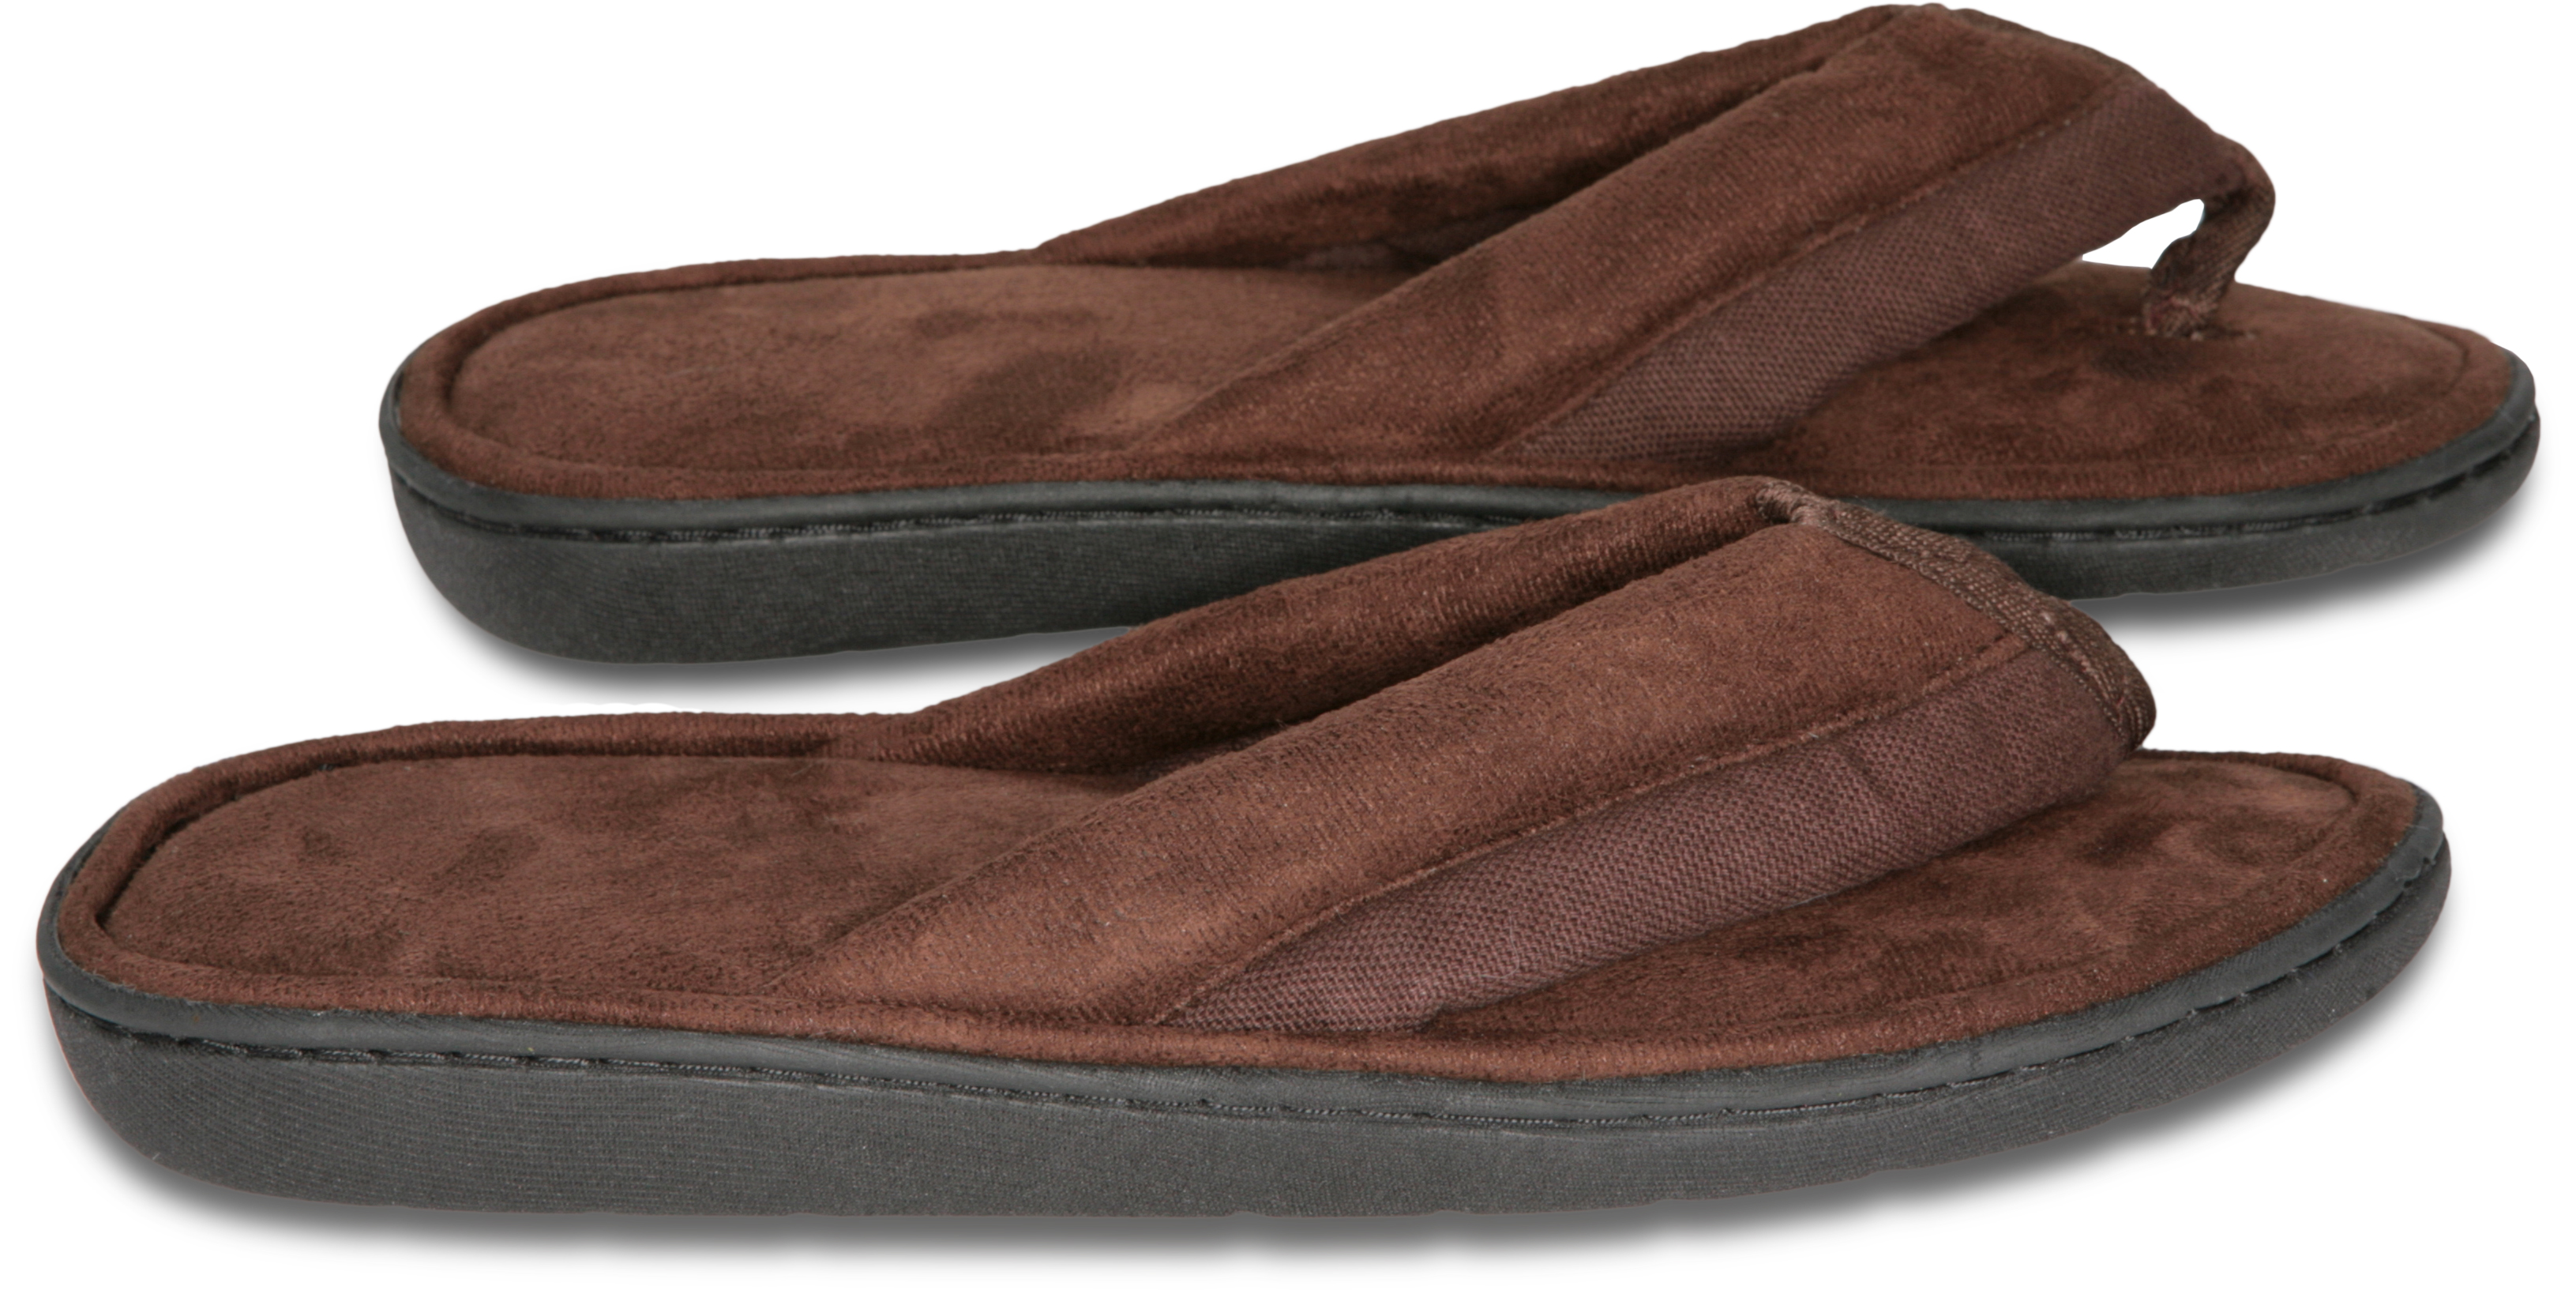 Deluxe Comfort Mens Memory Foam Slipper, Size 11-12 - Soft Linen 120D SBR Insole & Rubber Outsole - Pure Suede Shoes - Non Marking Sole - Mens Slippers, Brown - image 2 of 5